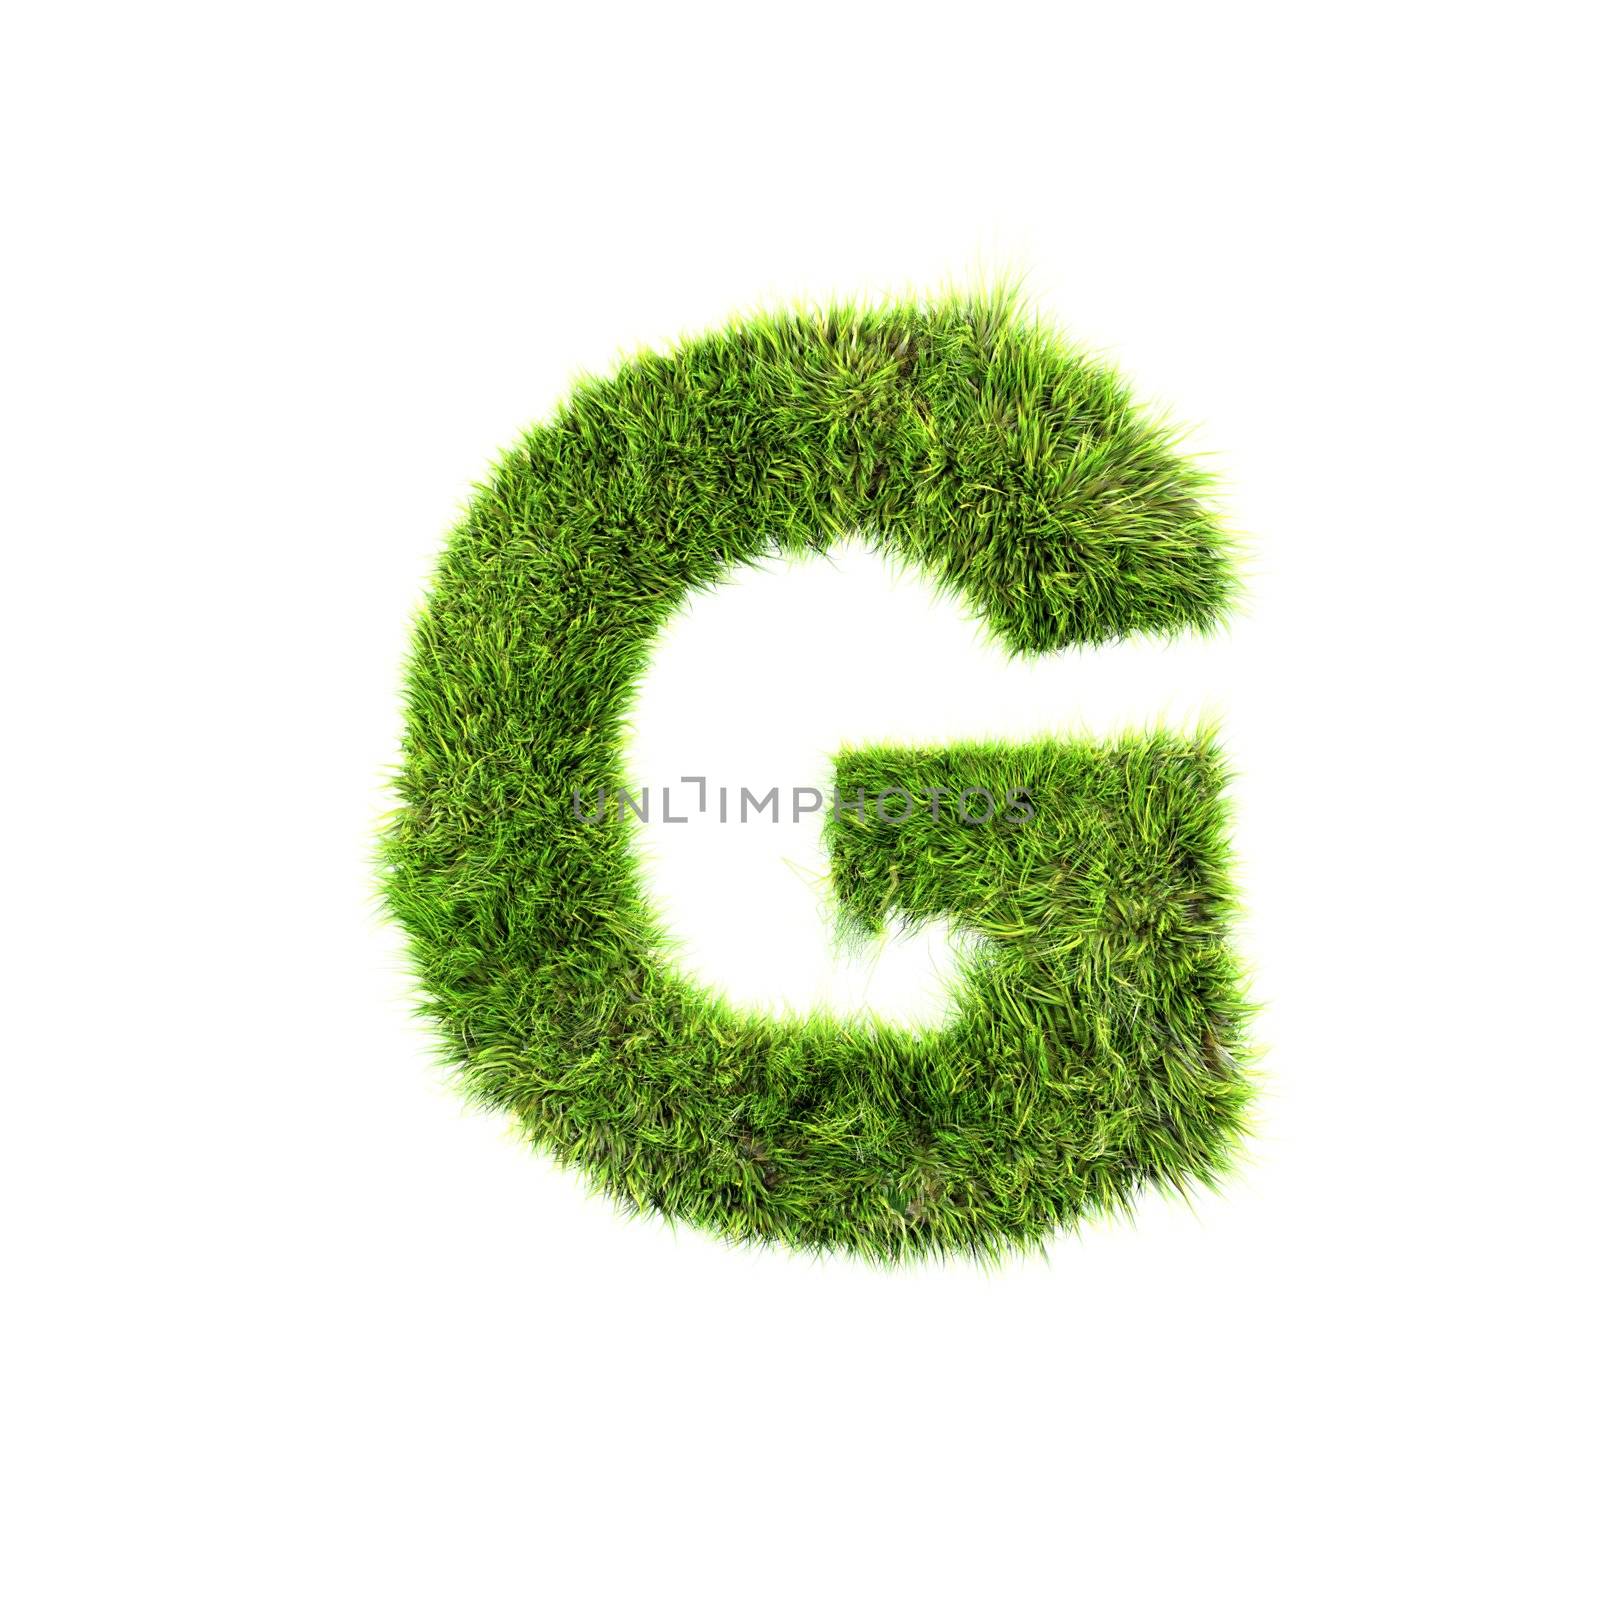 3d grass letter isolated on white background - G by chrisroll